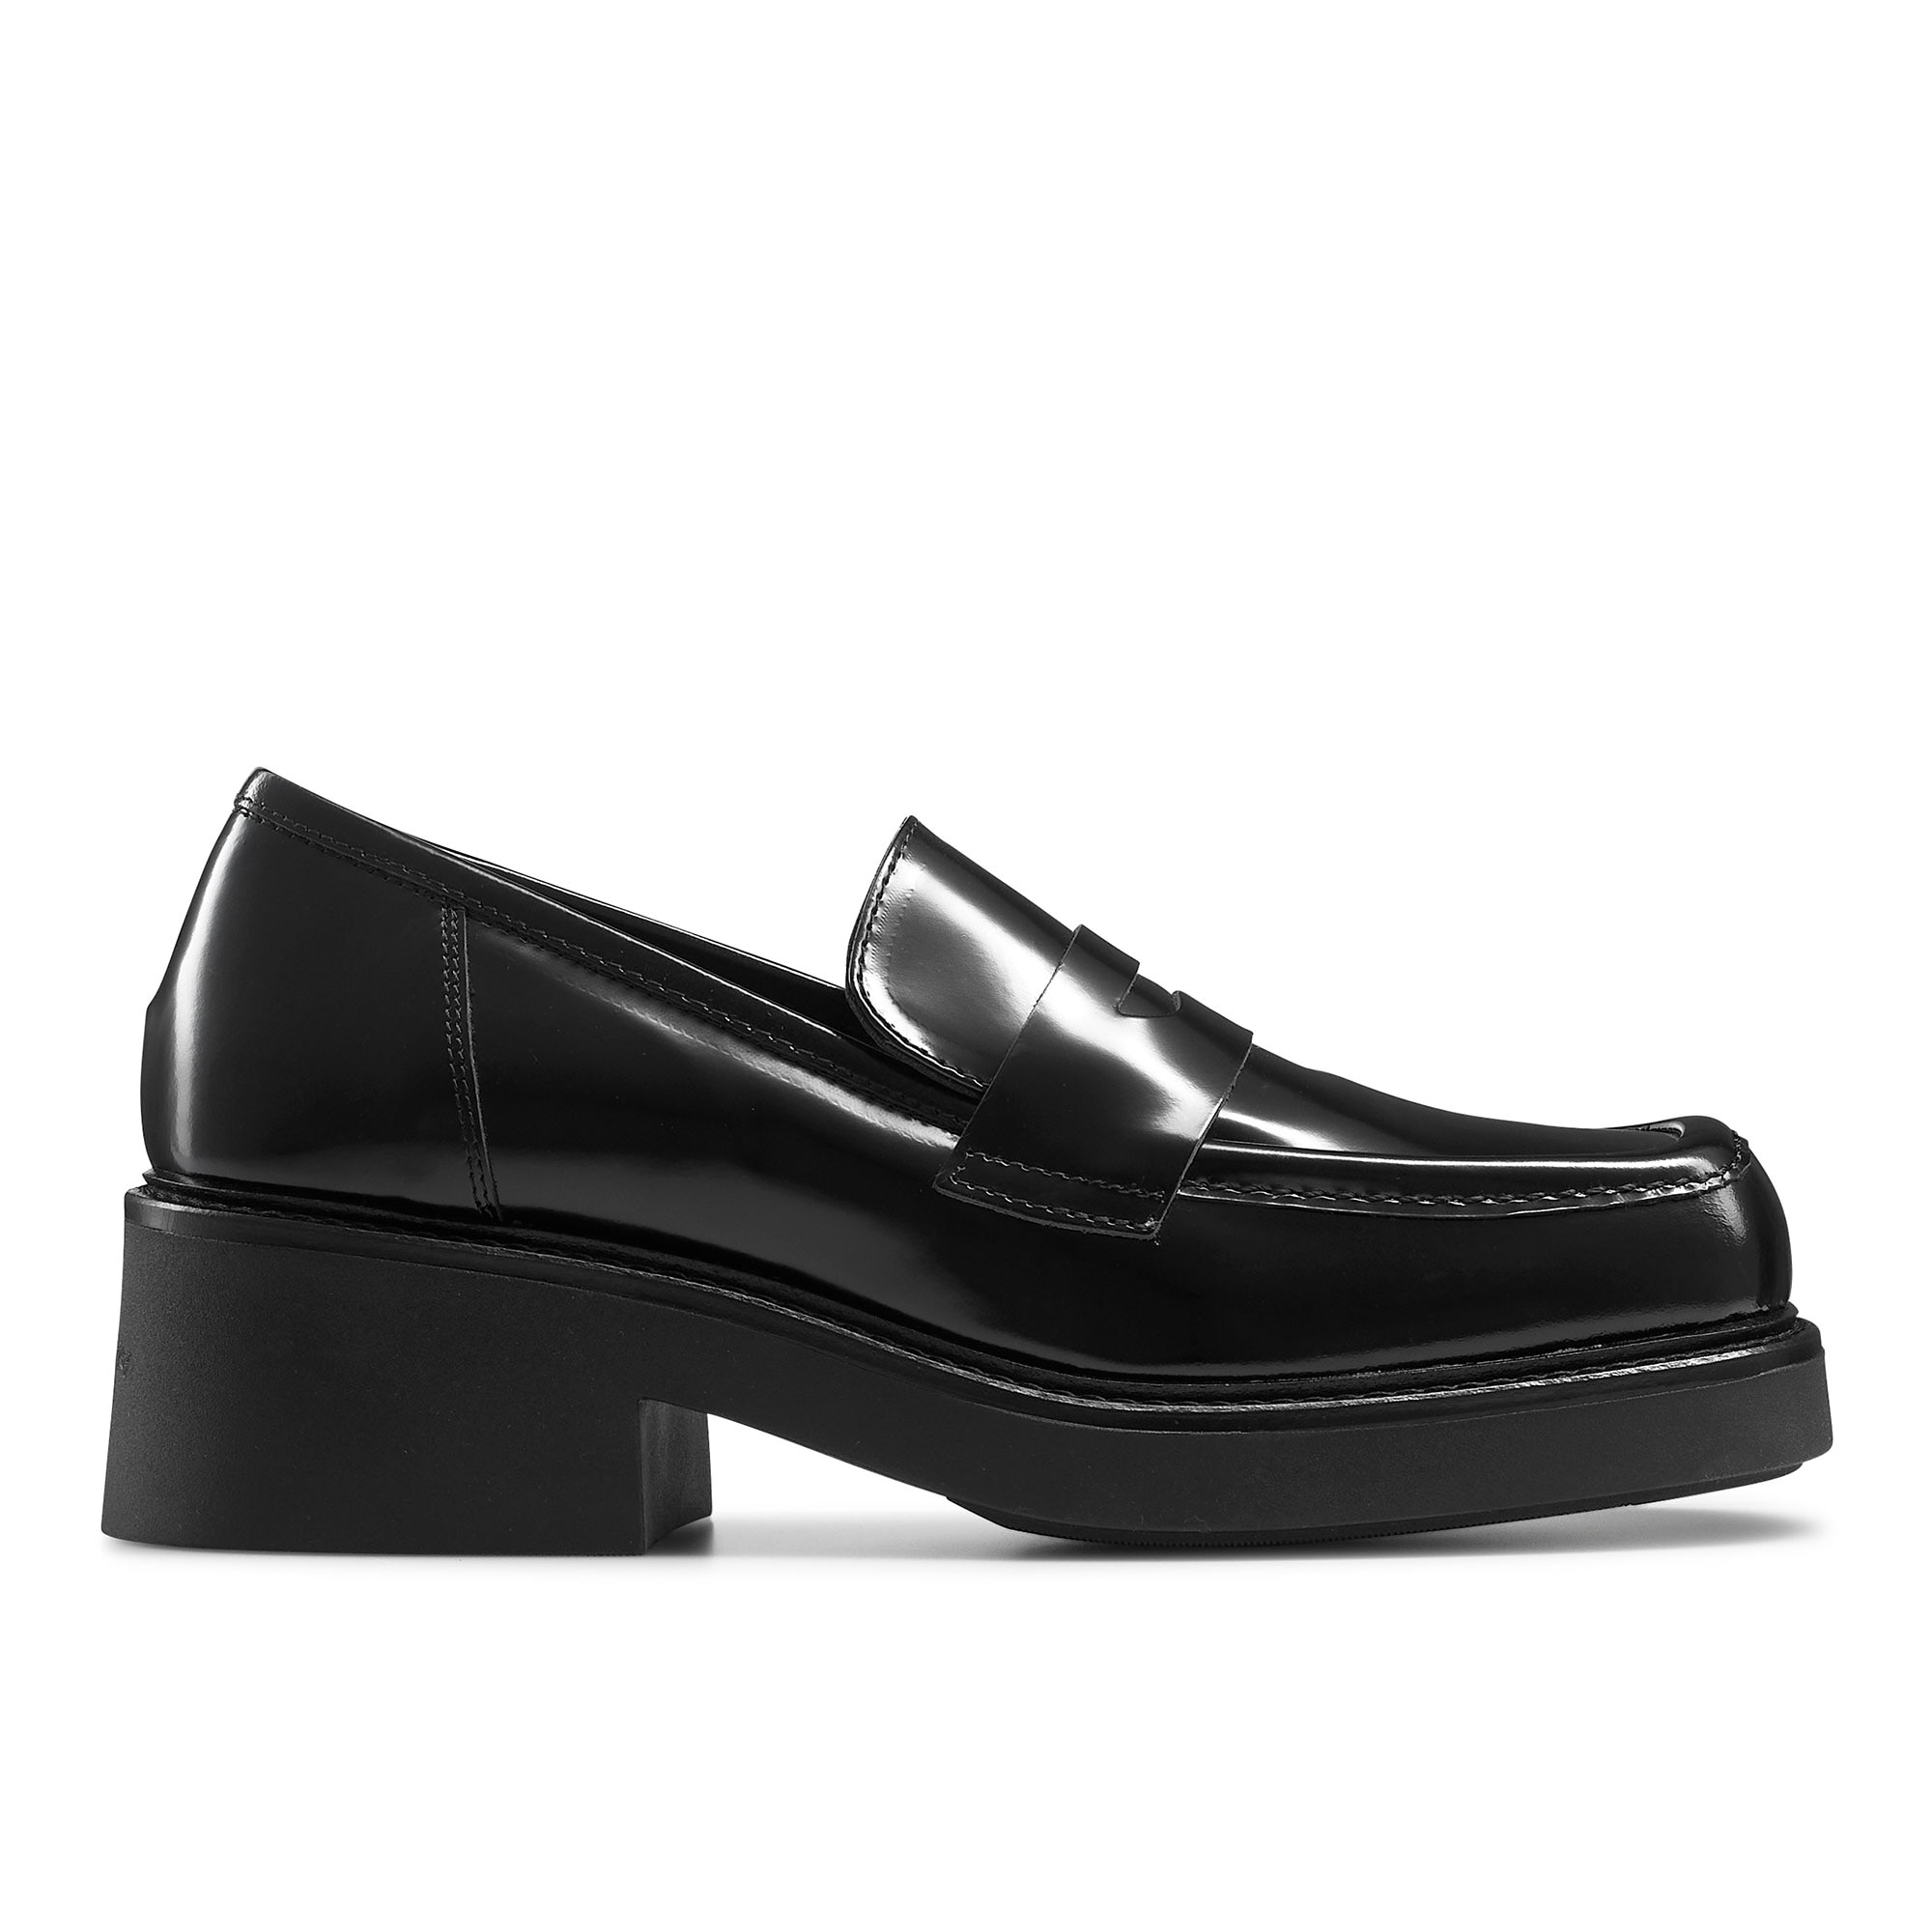 Russell and Bromley Solo platforms in black